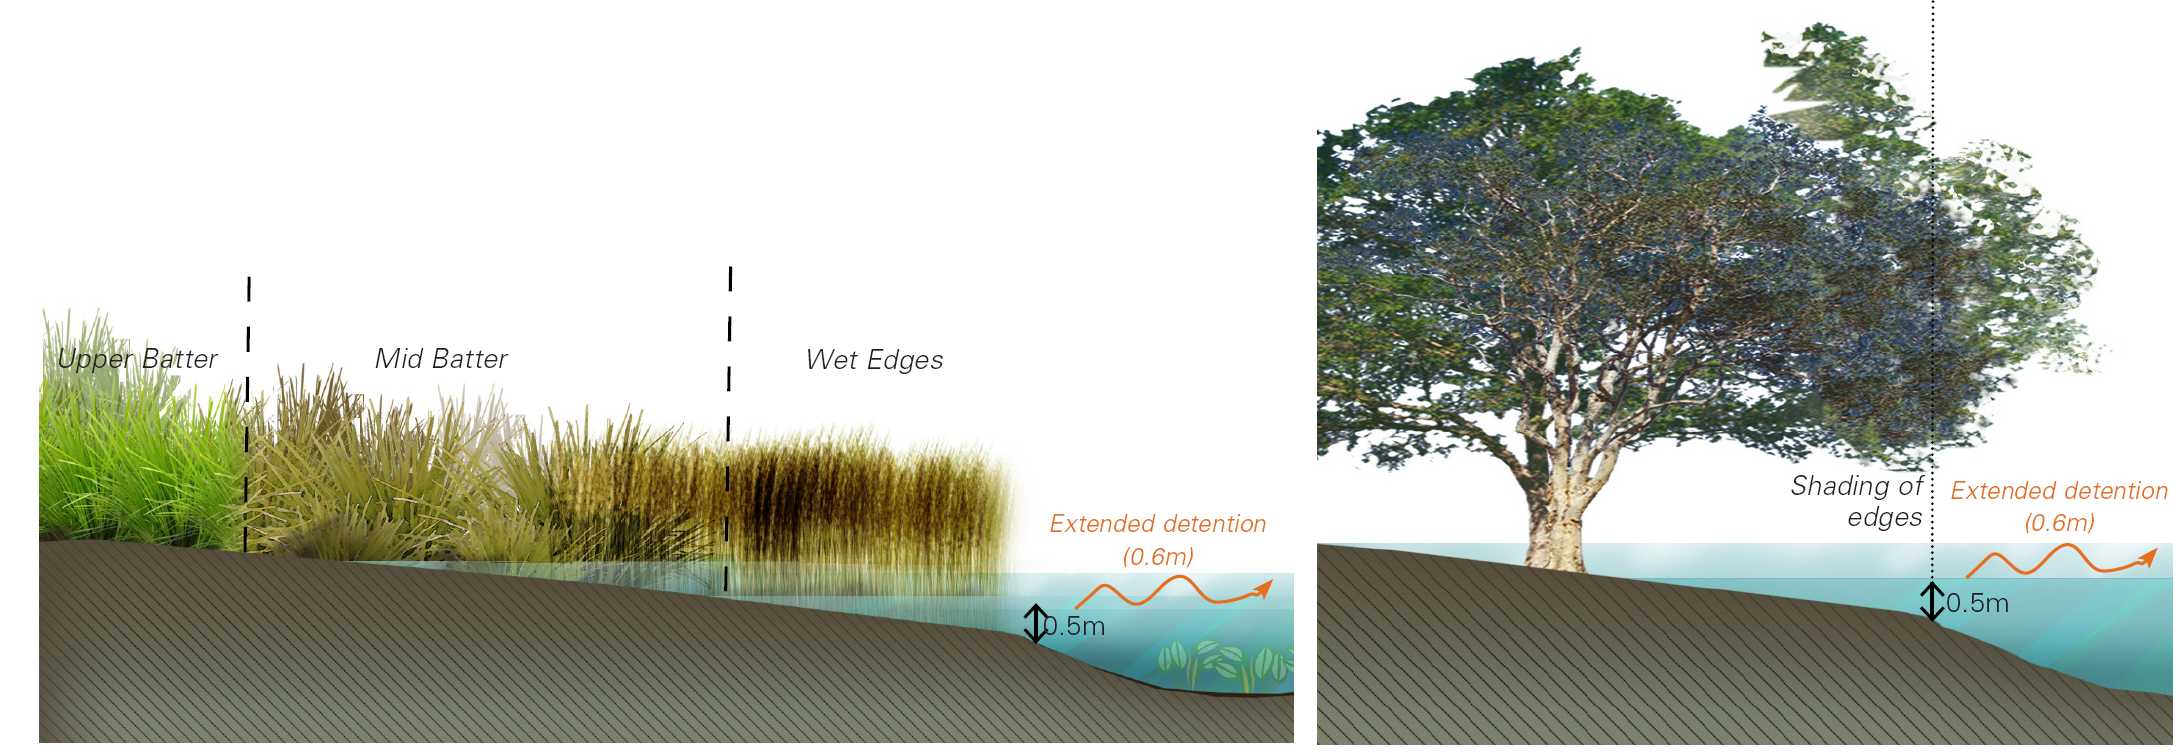 Figure 8 Planting concepts to encourage growth of reeds and sedges and minimise weeds in the macrophyte zone. Image by E2DesignLab